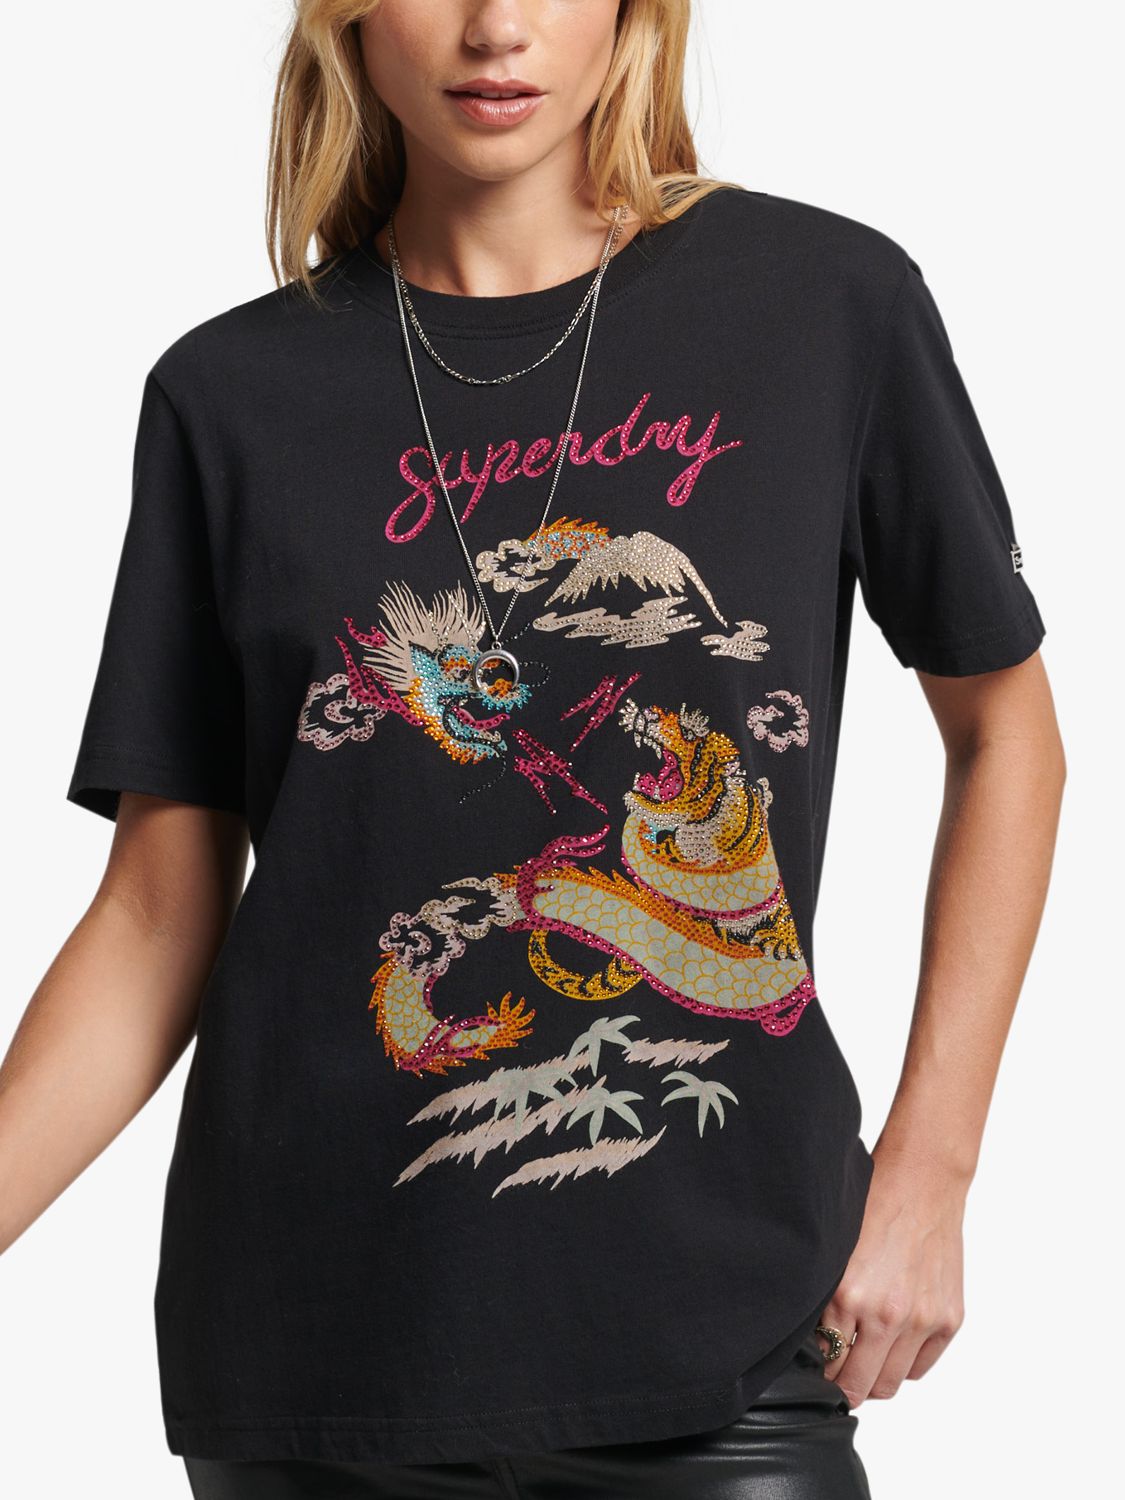 Superdry Rhinestone Graphic T-Shirt, Heavy Amp at Lewis &